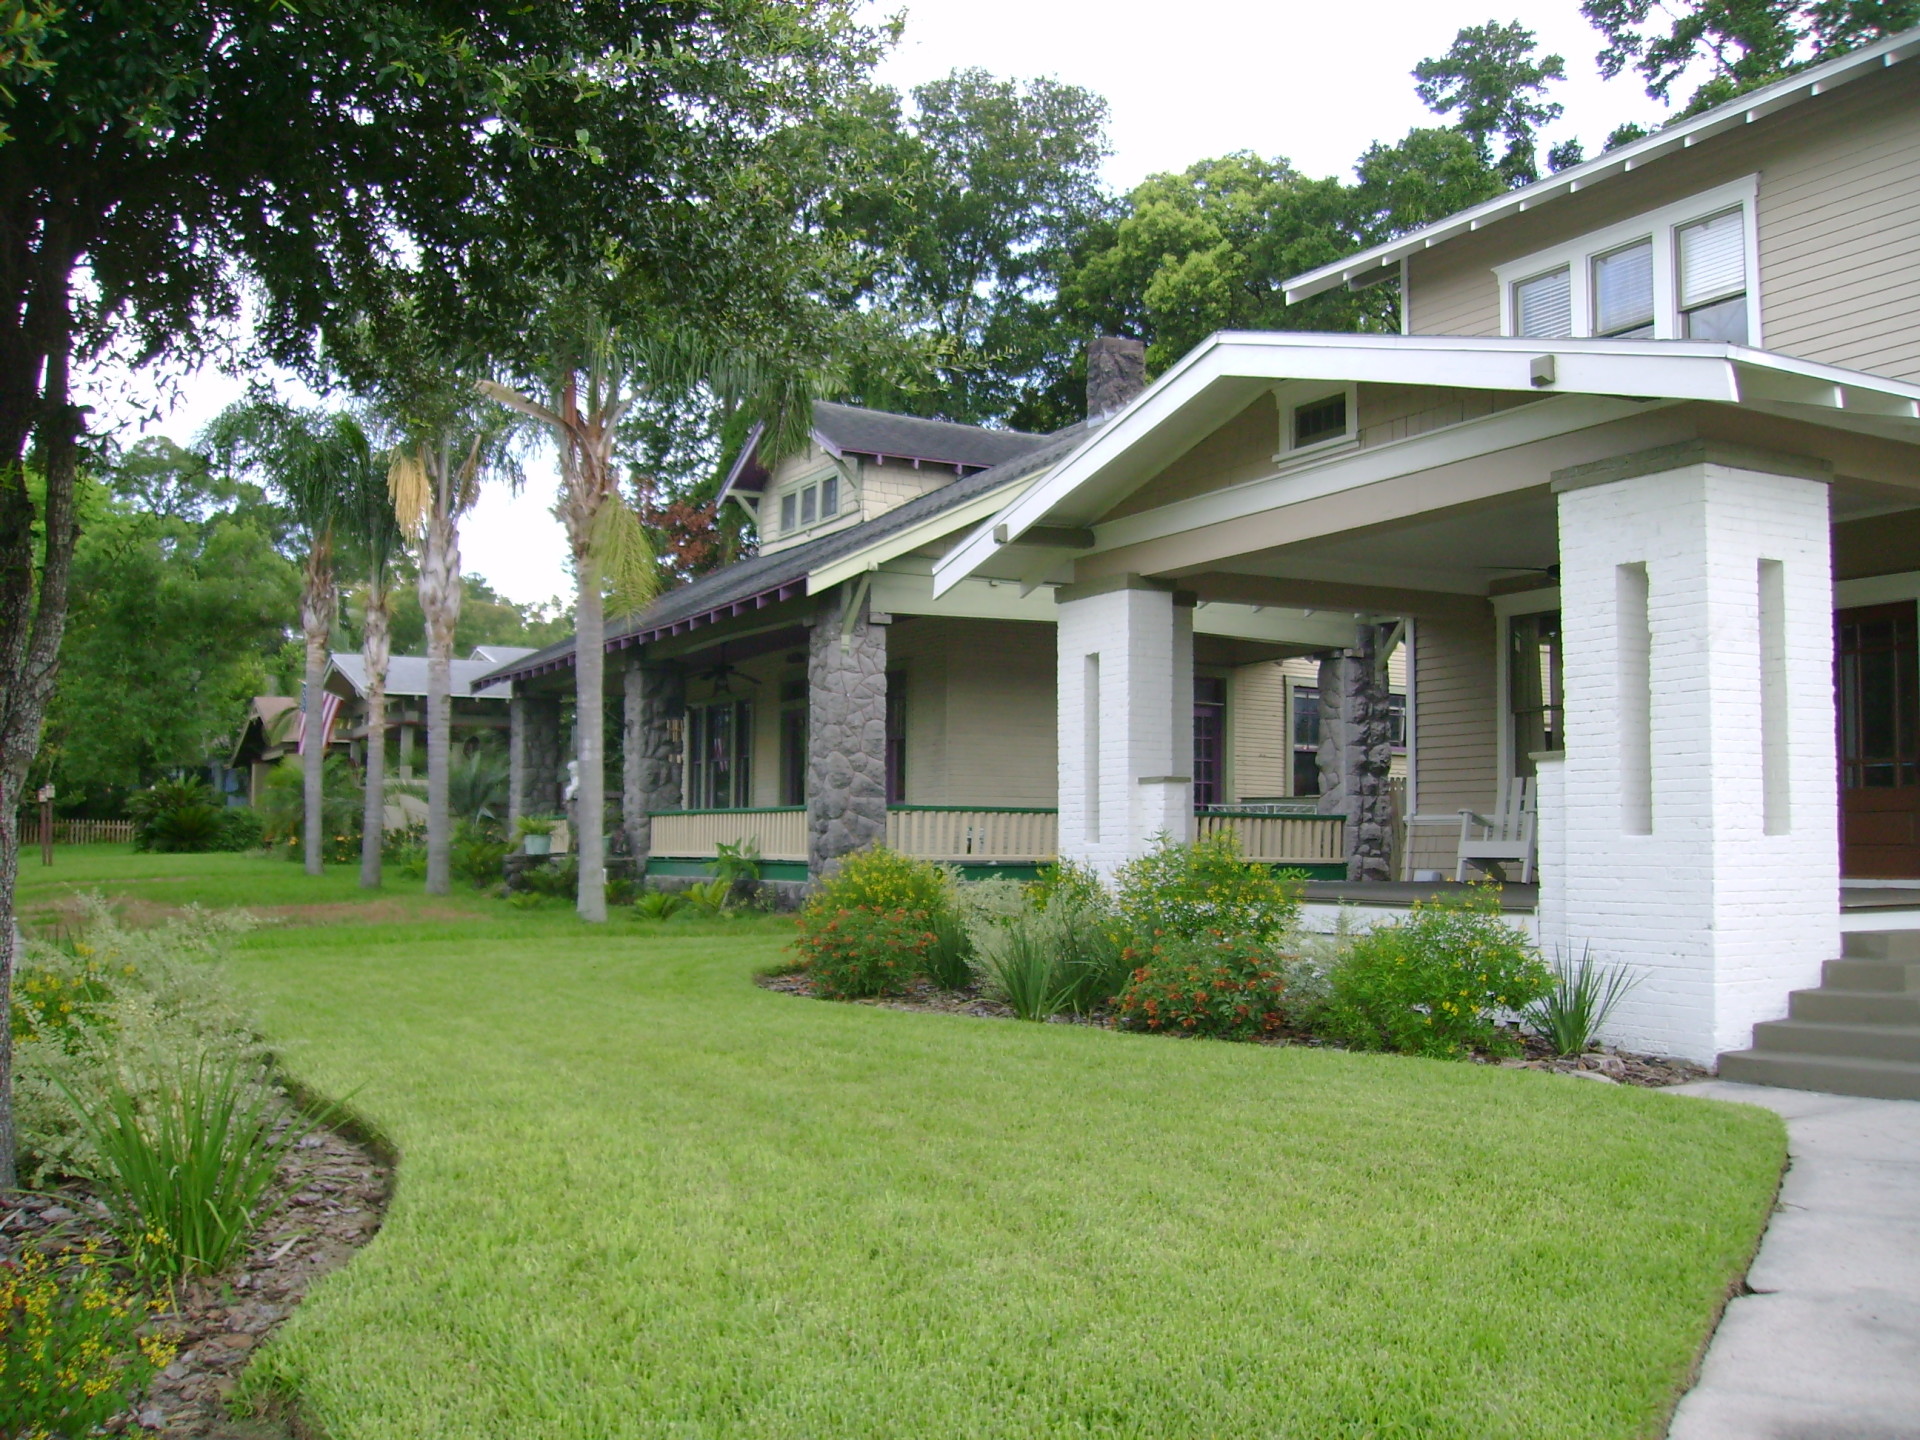 This home on Central Avenue in Old Seminole Heights typifies one of the many style homes seen in the neighborhood. (Credit: Wikimedia Commons)